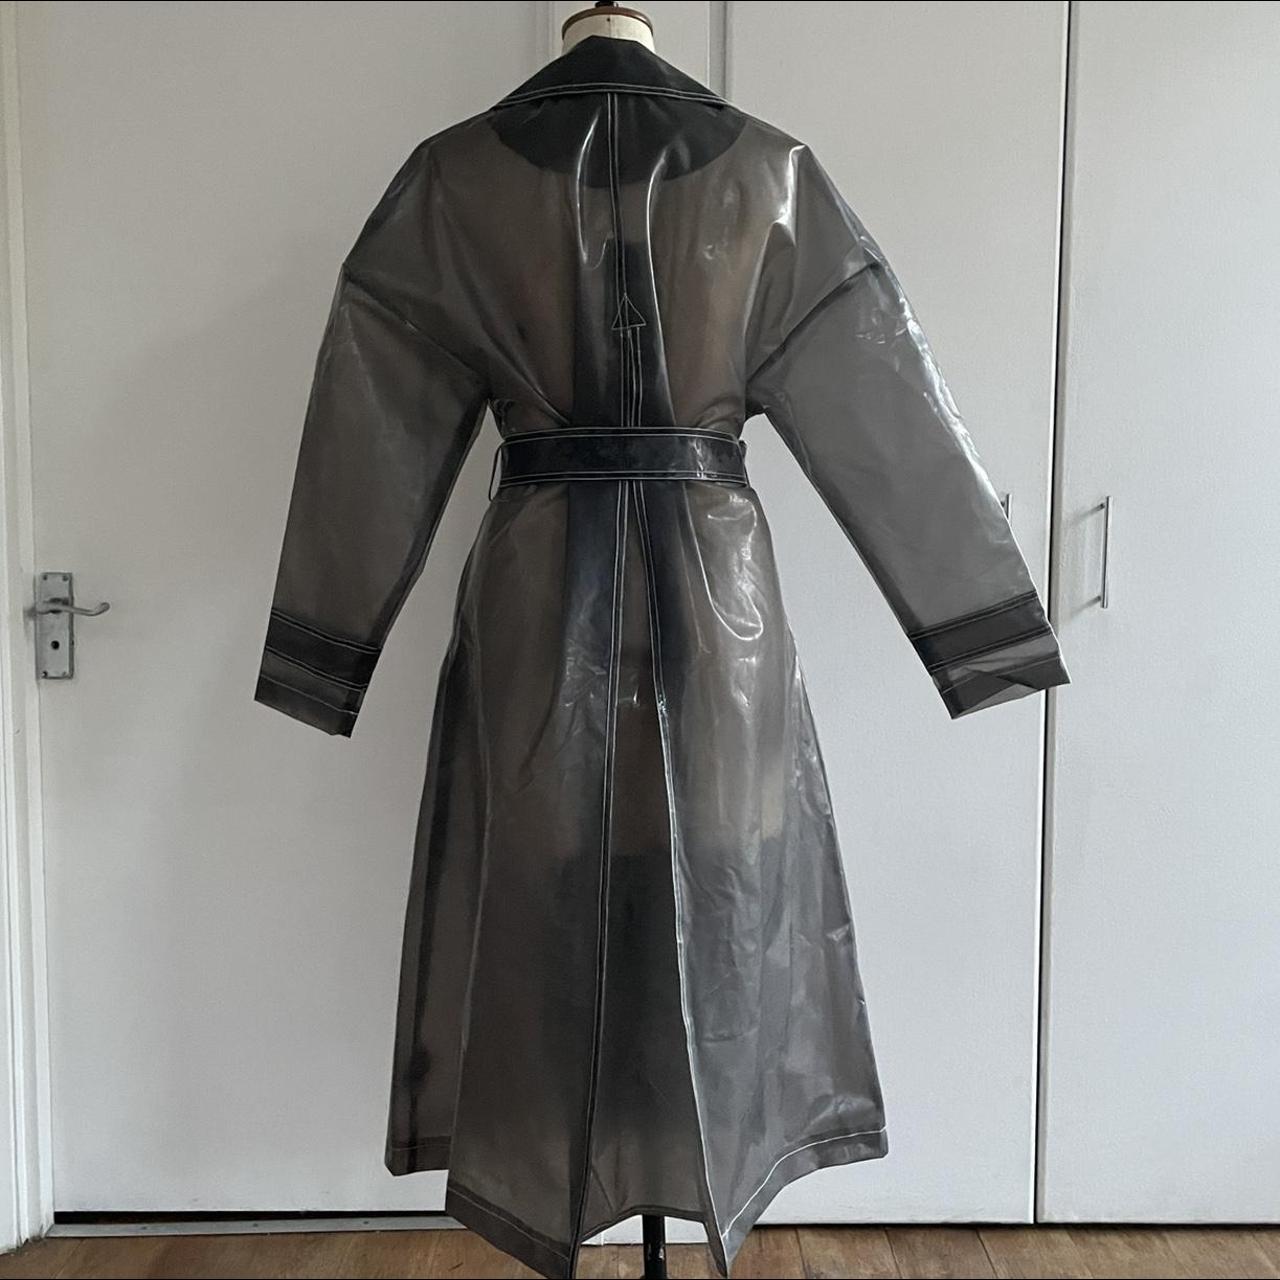 Grey pvc raincoat with side pockets Fit all sizes - Depop